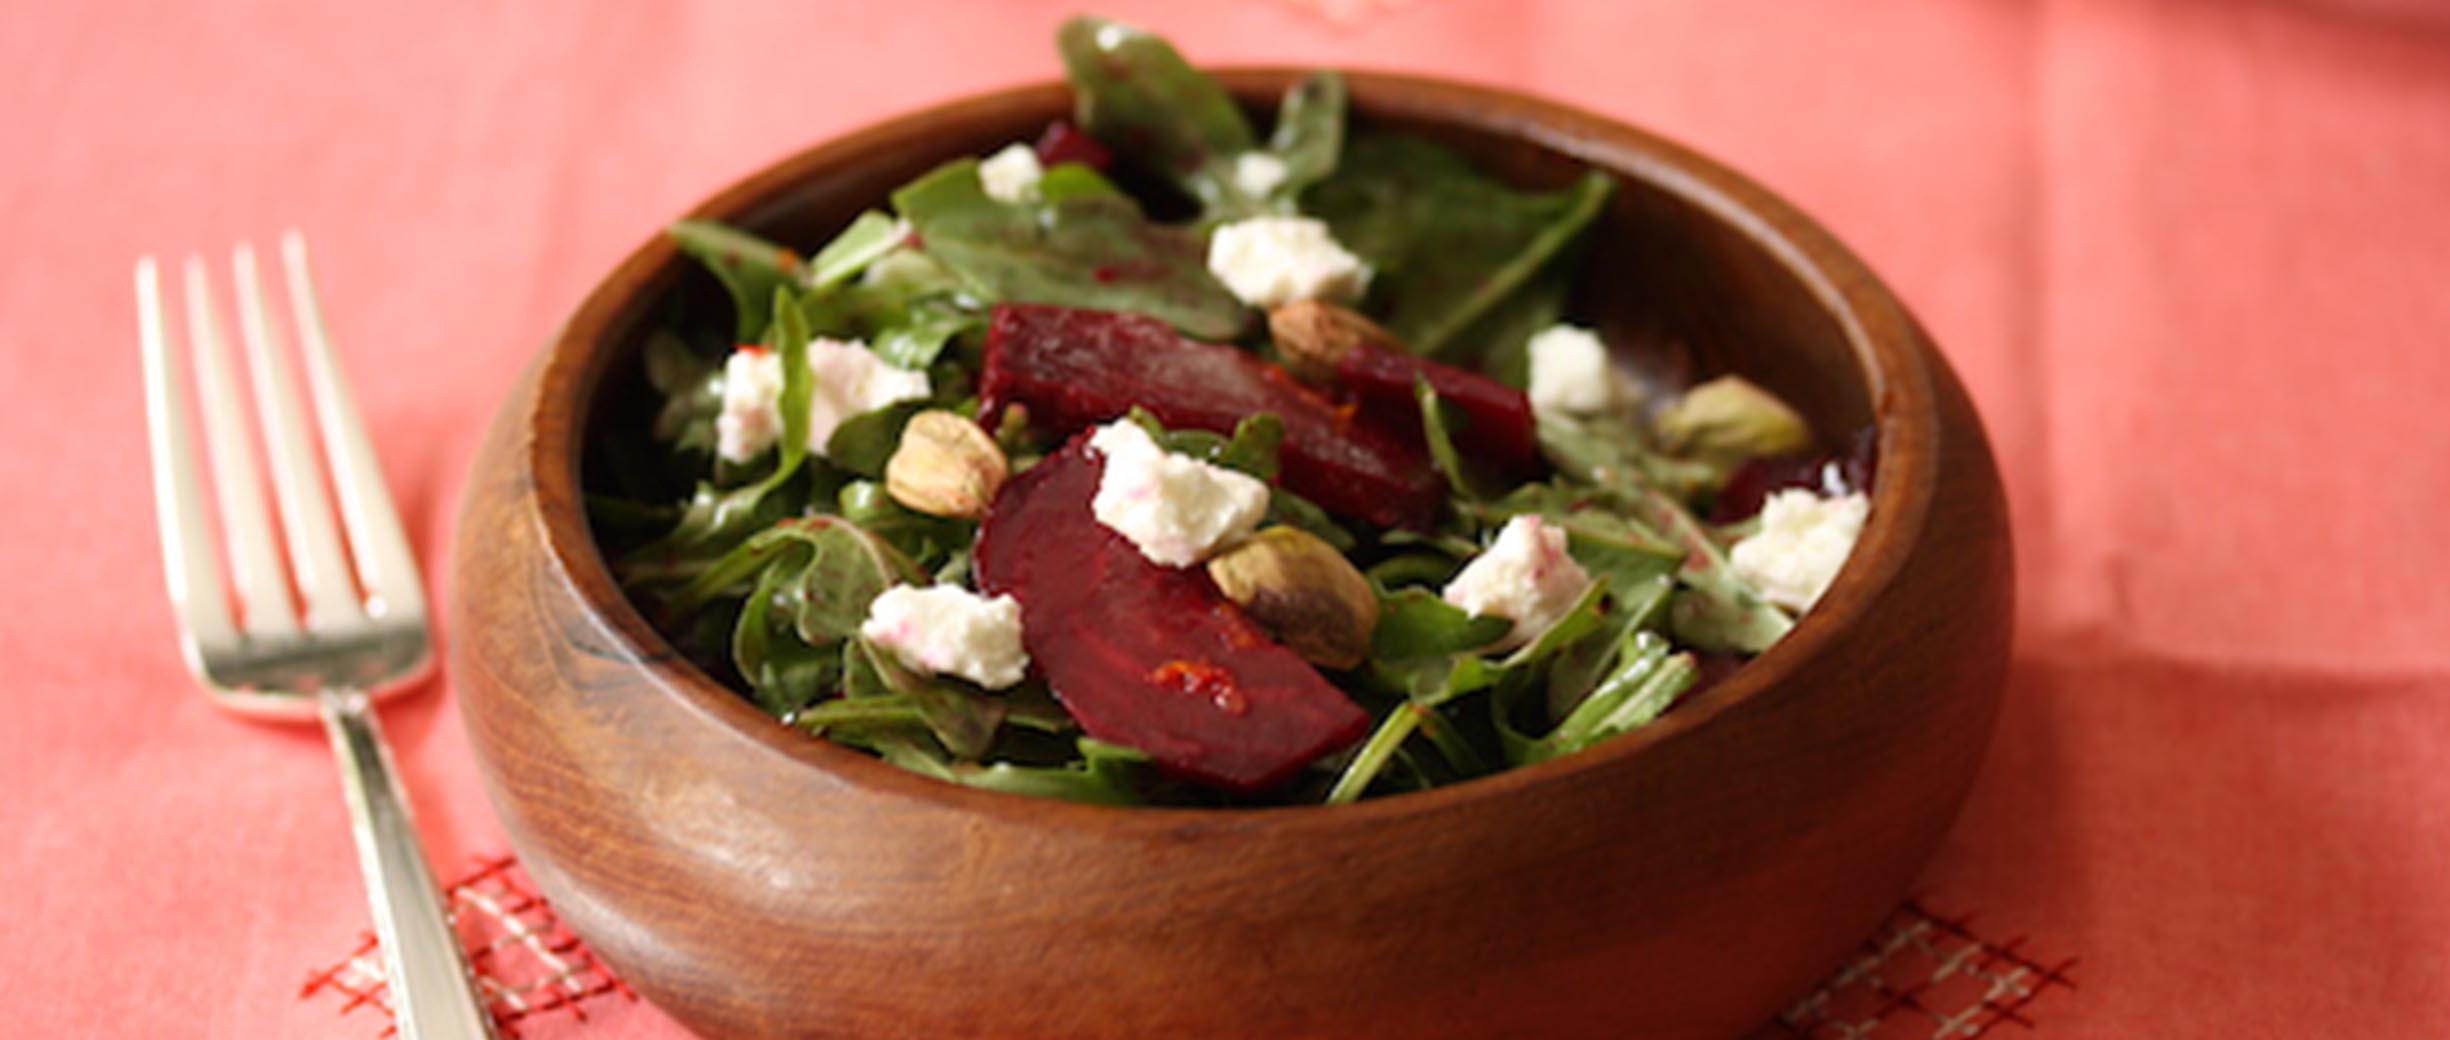 Beet Salad with Asian Pears